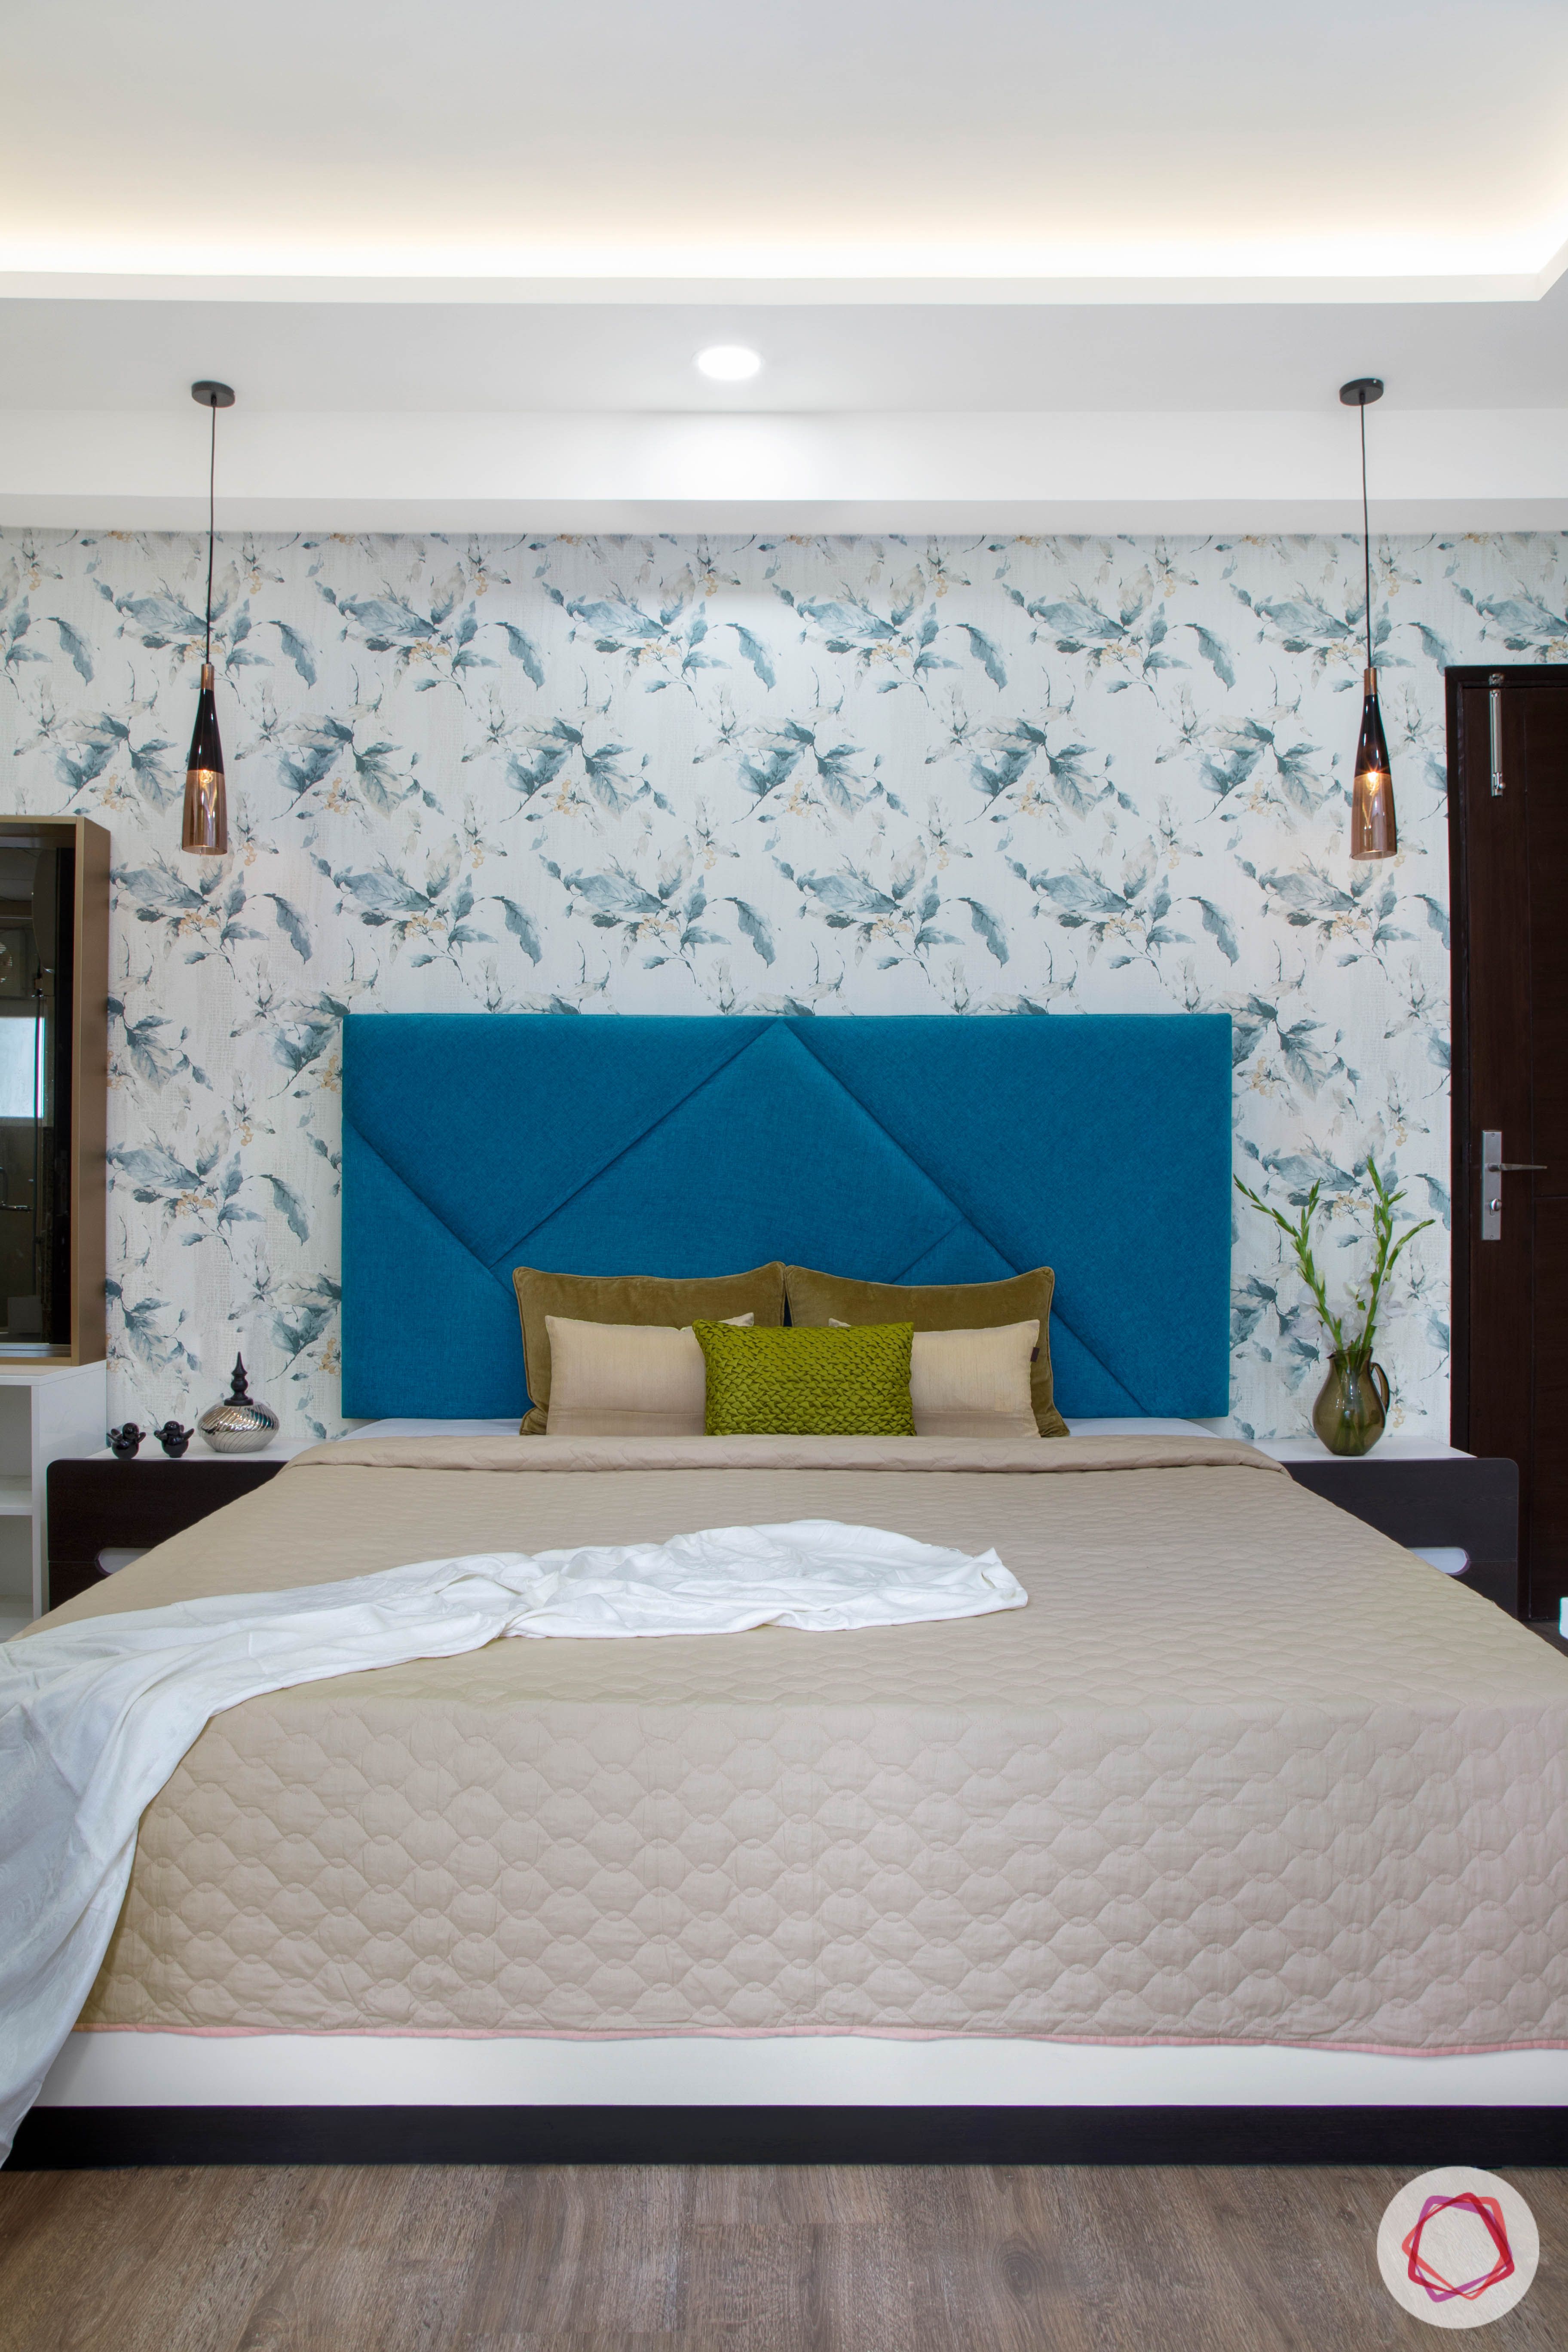 Cleo county noida_master bedroom with blue headboard on white bed